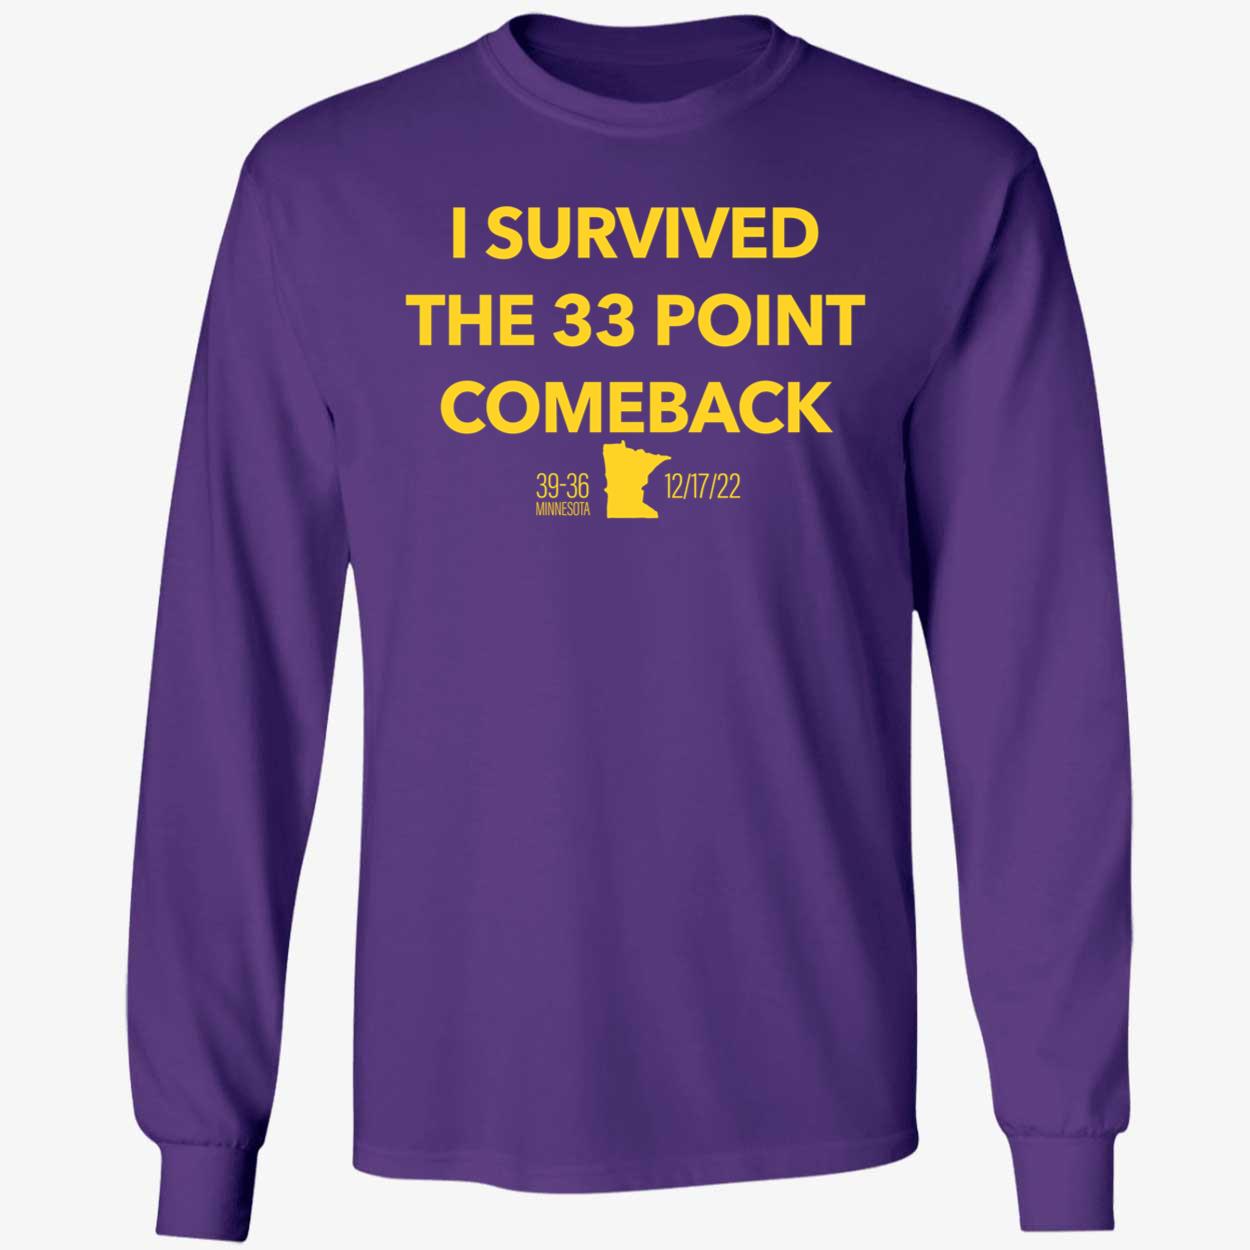 i survived the 33 point comeback shirt